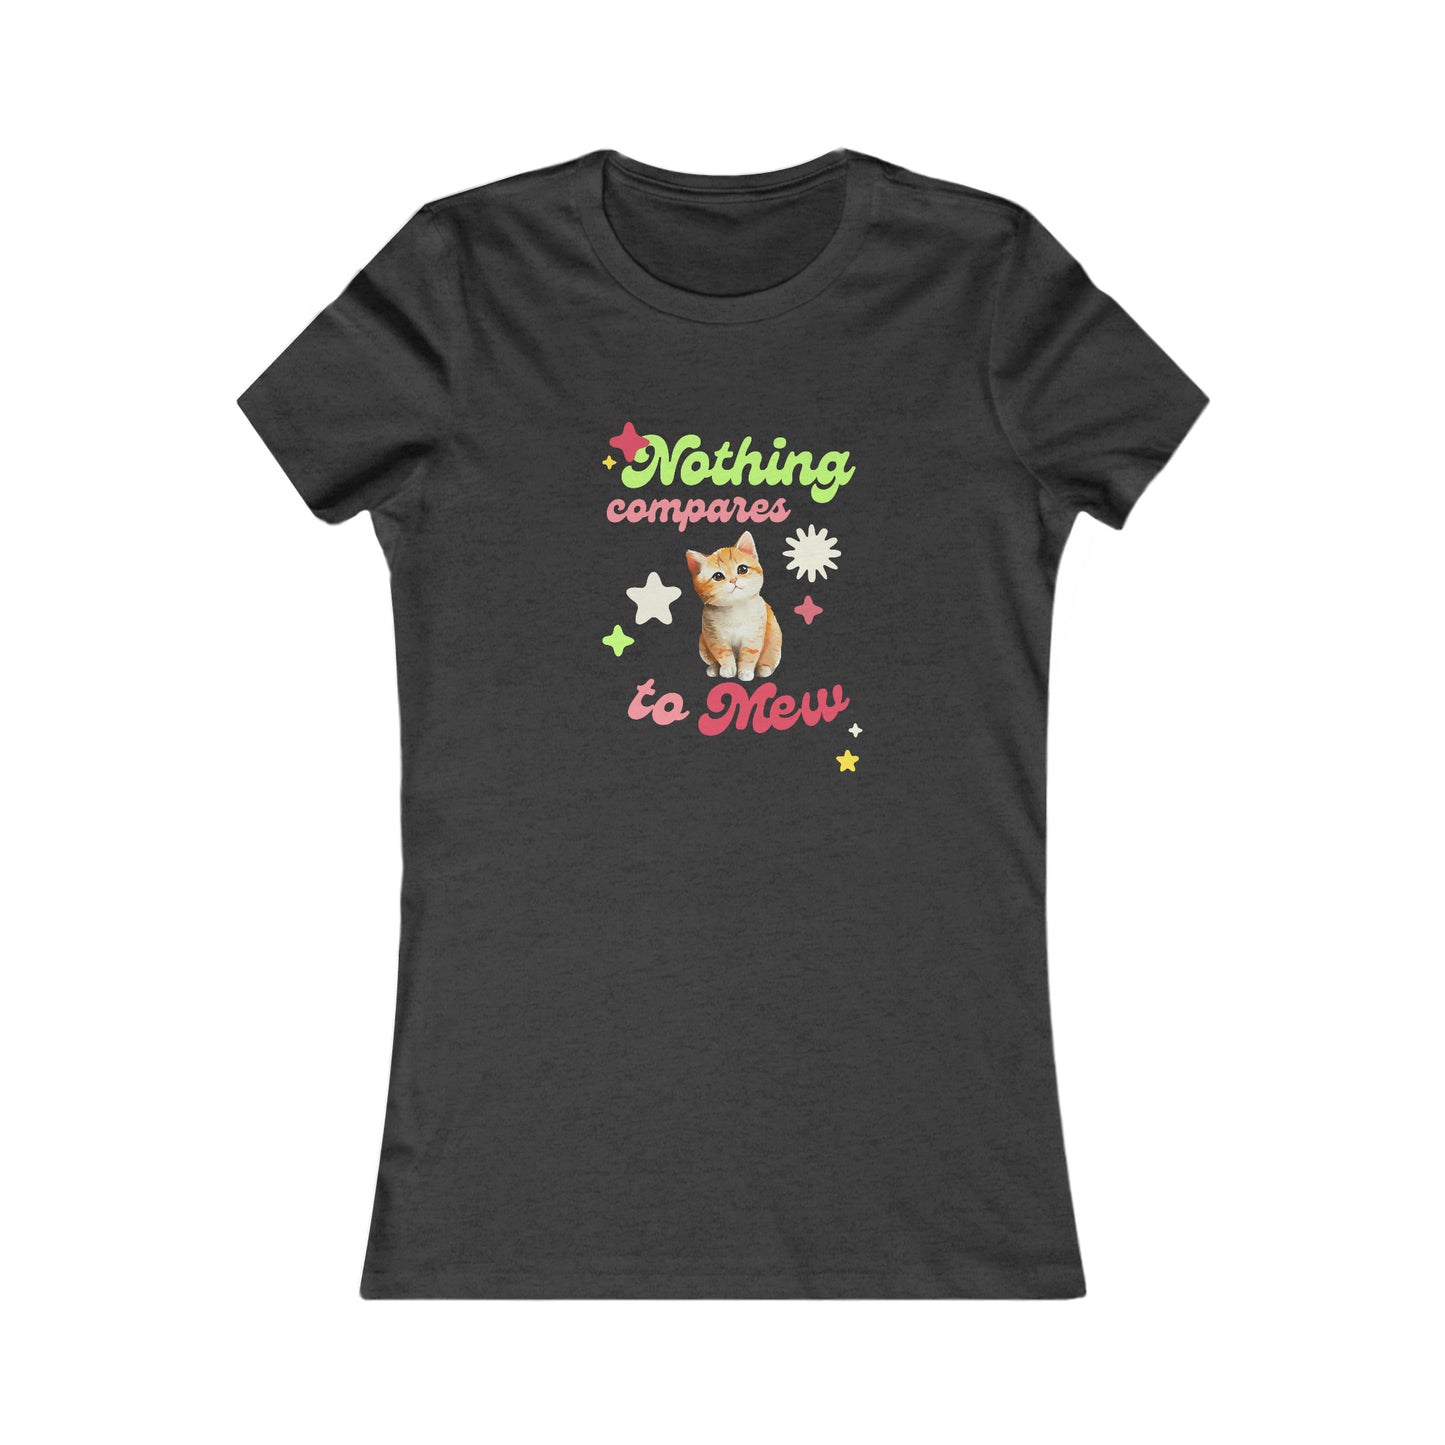 Nothing Compares to Mew Women's Tee